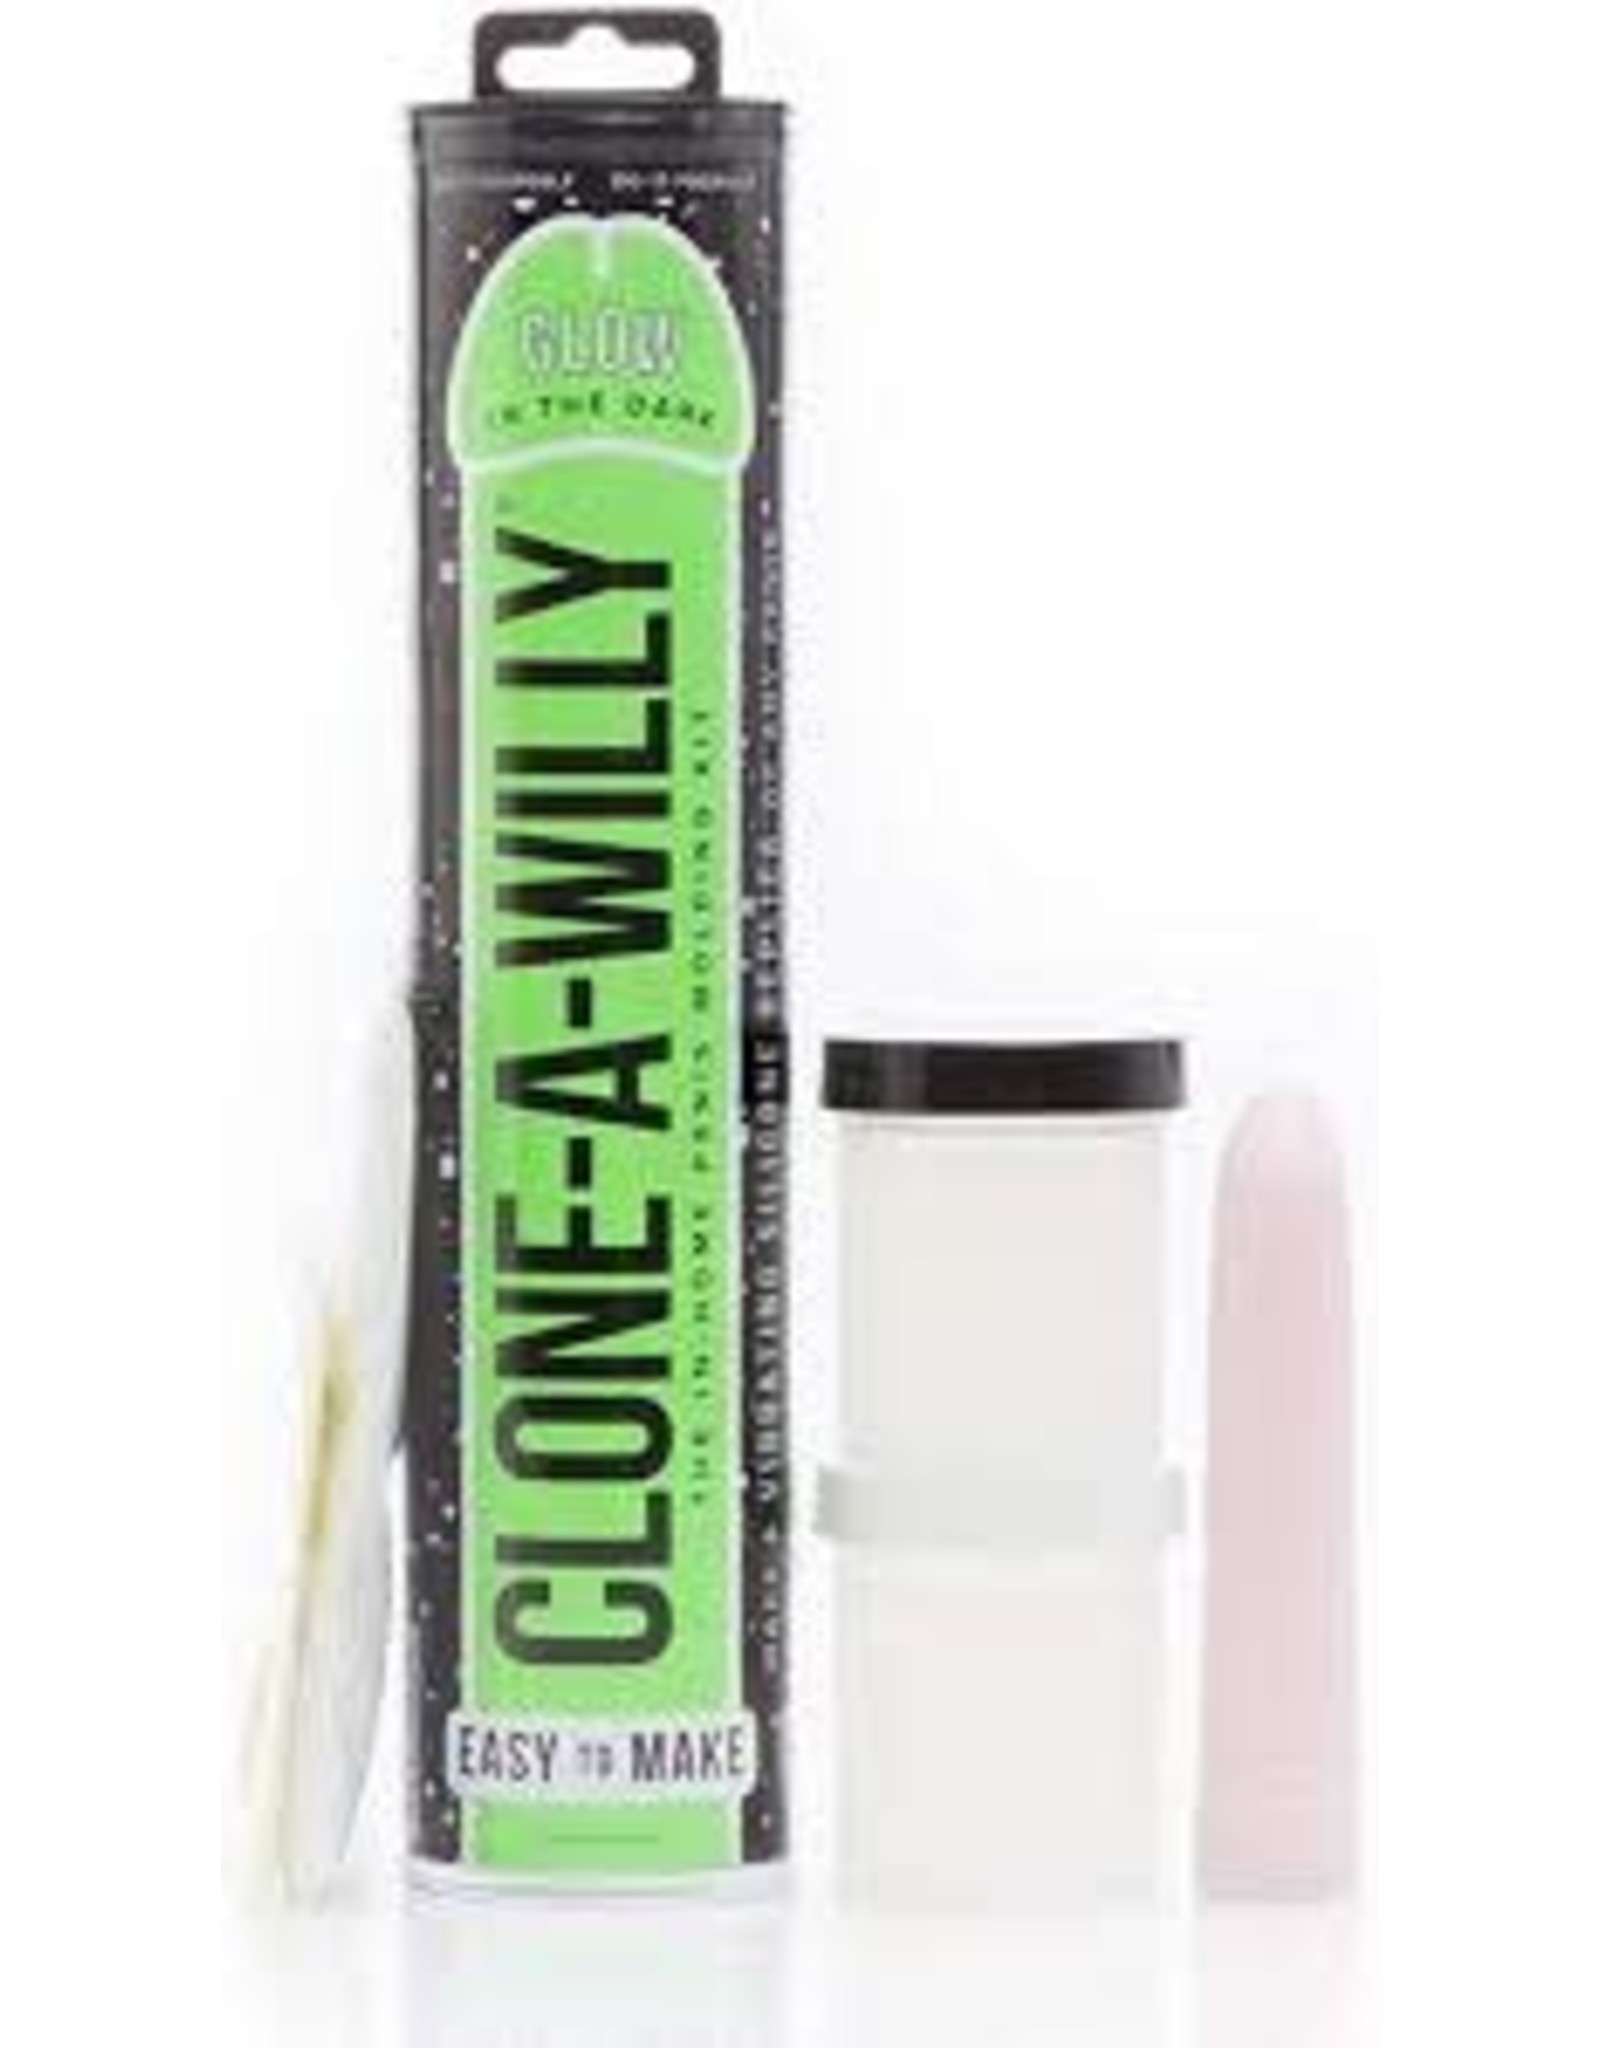 Empire Labs Clone-A-Willy - Glow in the Dark & Vibrating (Green)